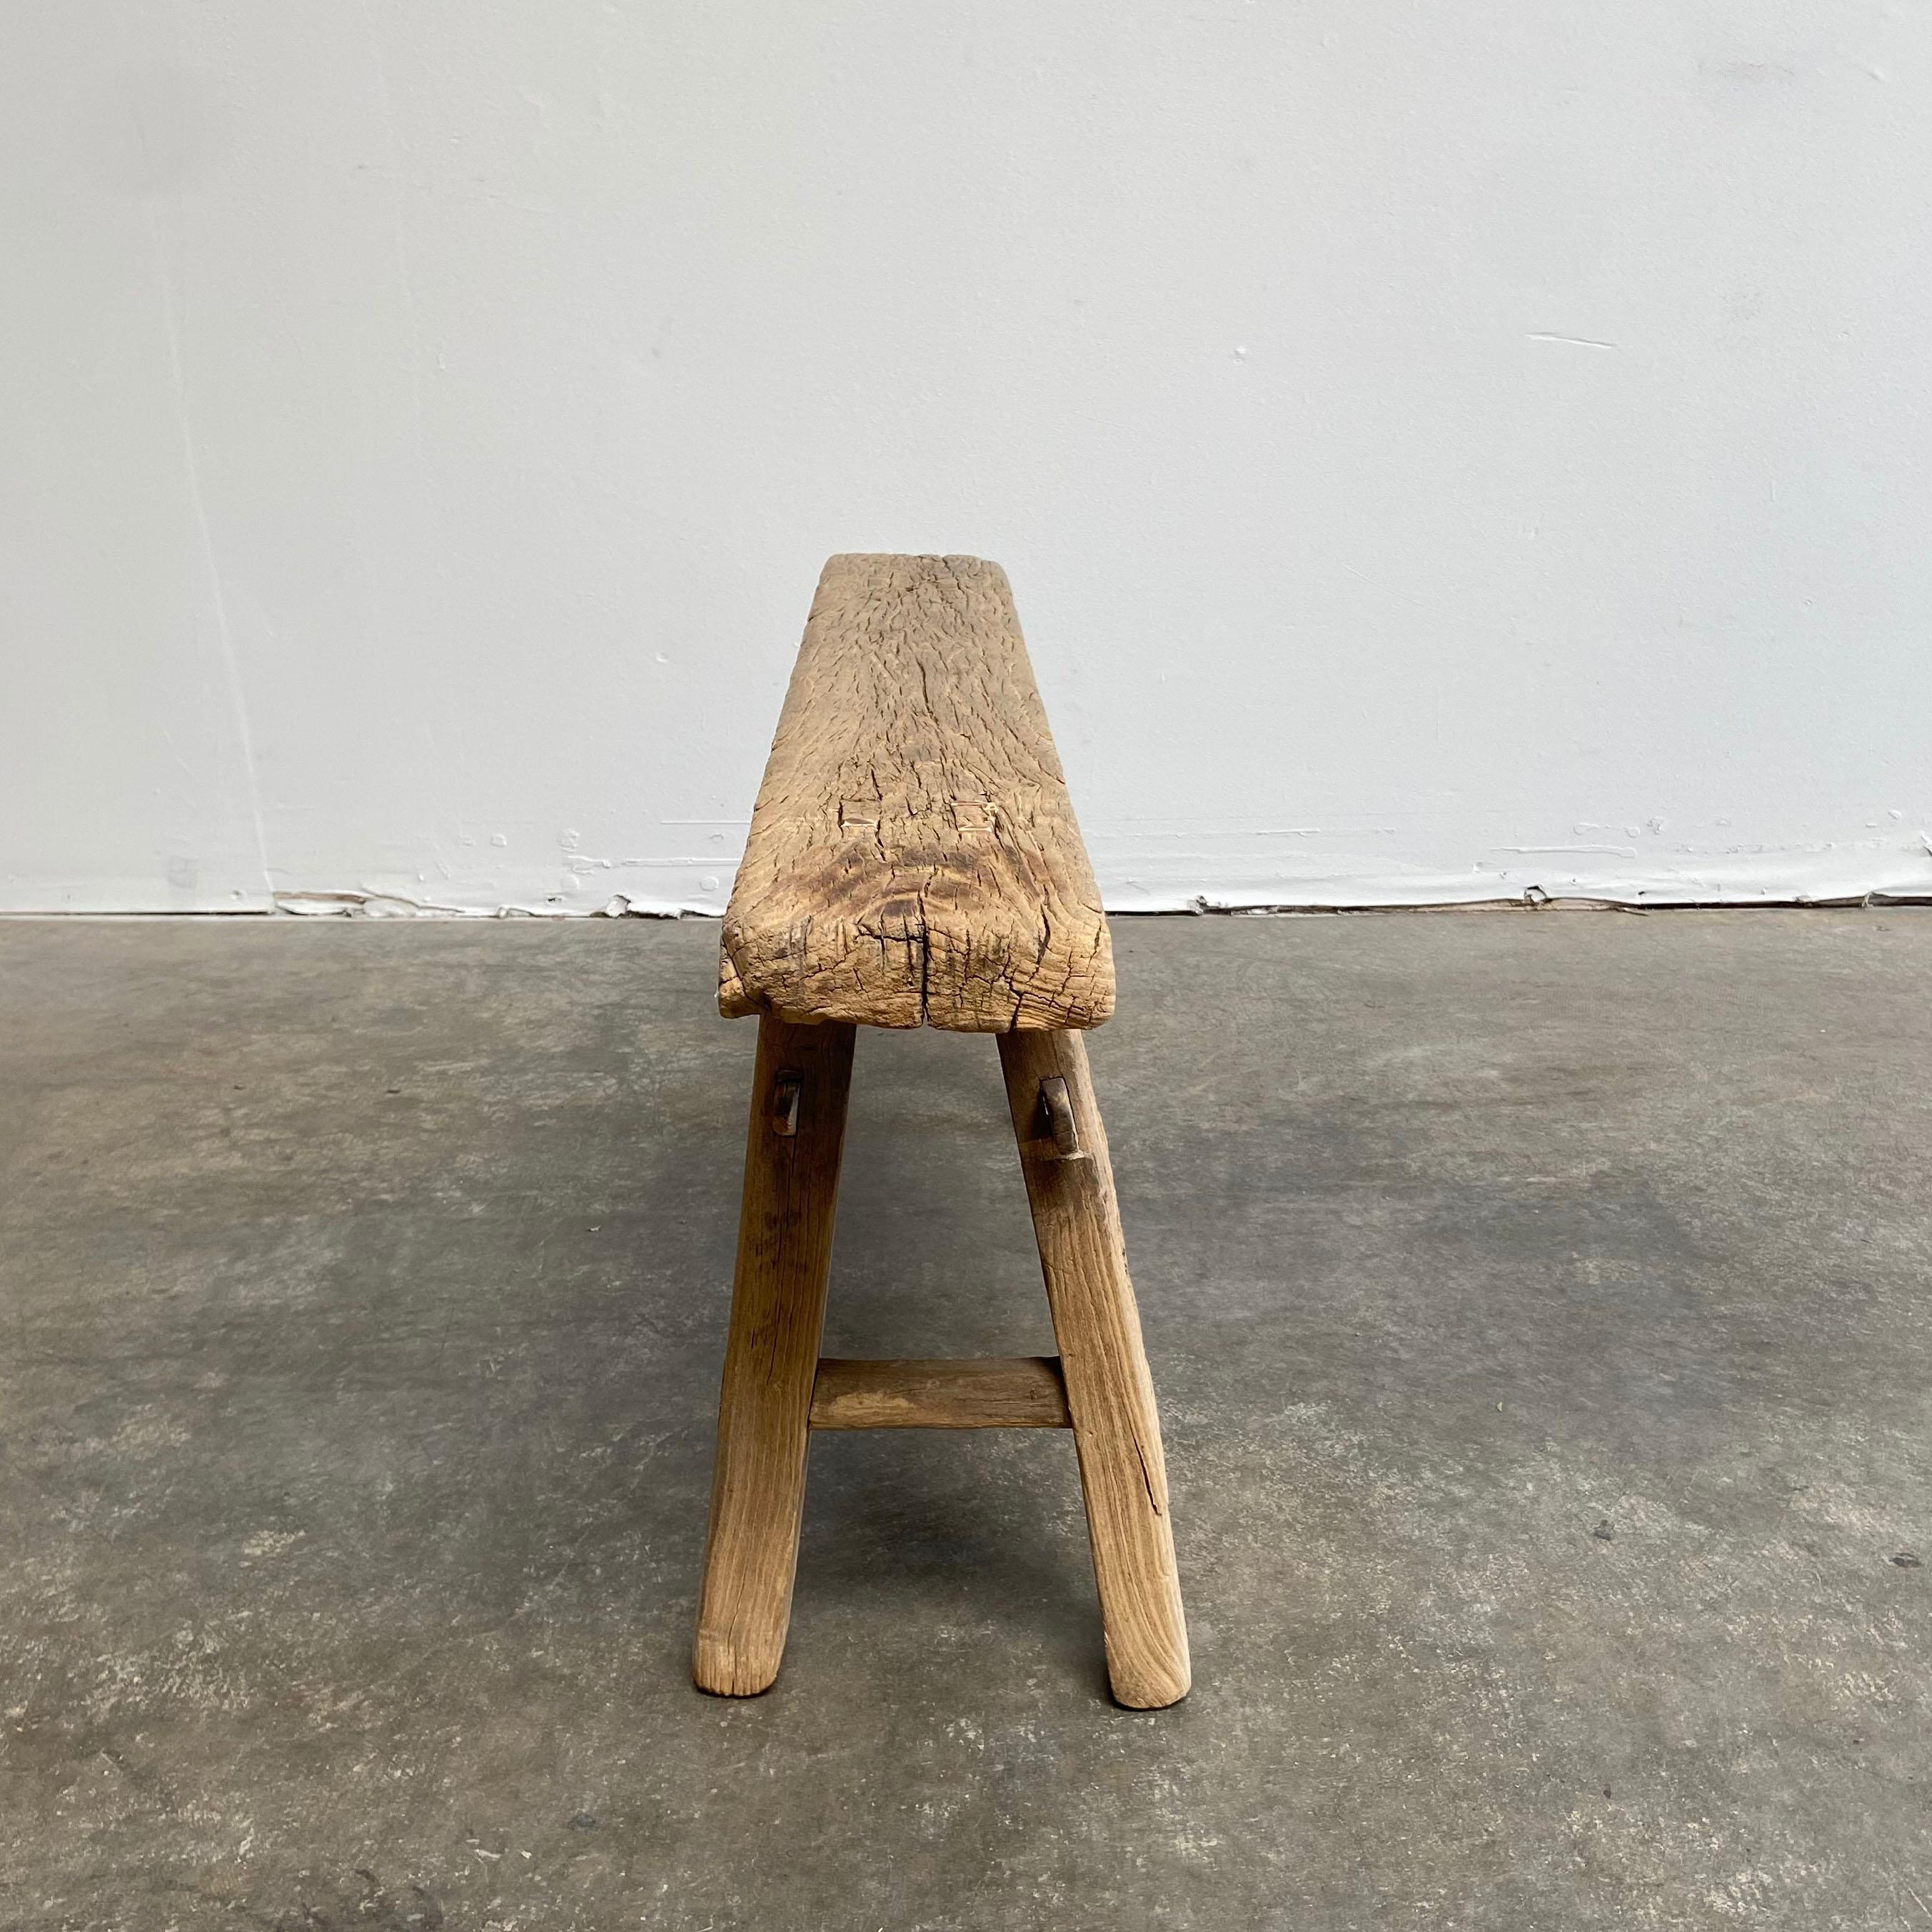 Skinny bench / vintage antique elm wood bench
These are the real vintage antique elm wood benches! Beautiful antique patina, with weathering and age, these are solid and sturdy ready for daily use, use as a table behind a sofa, stool, coffee table,